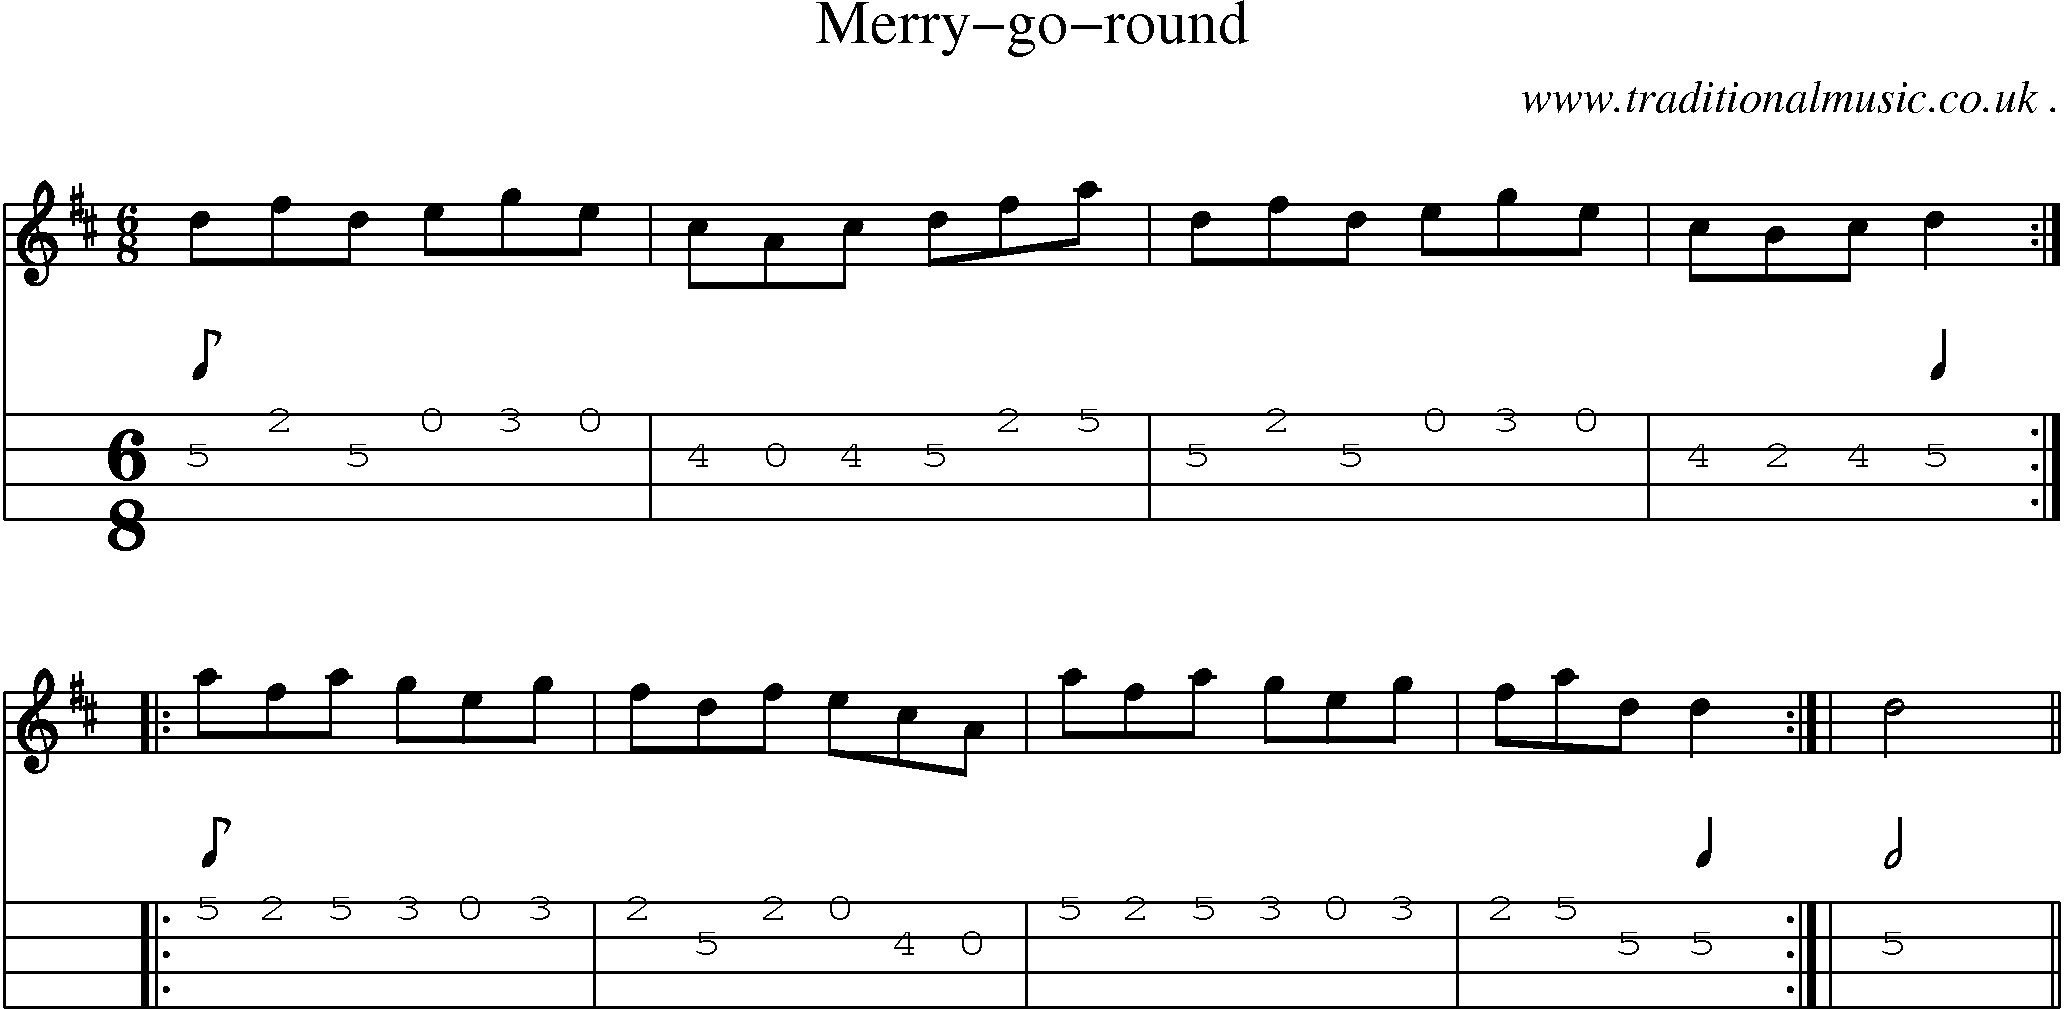 Sheet-Music and Mandolin Tabs for Merry-go-round